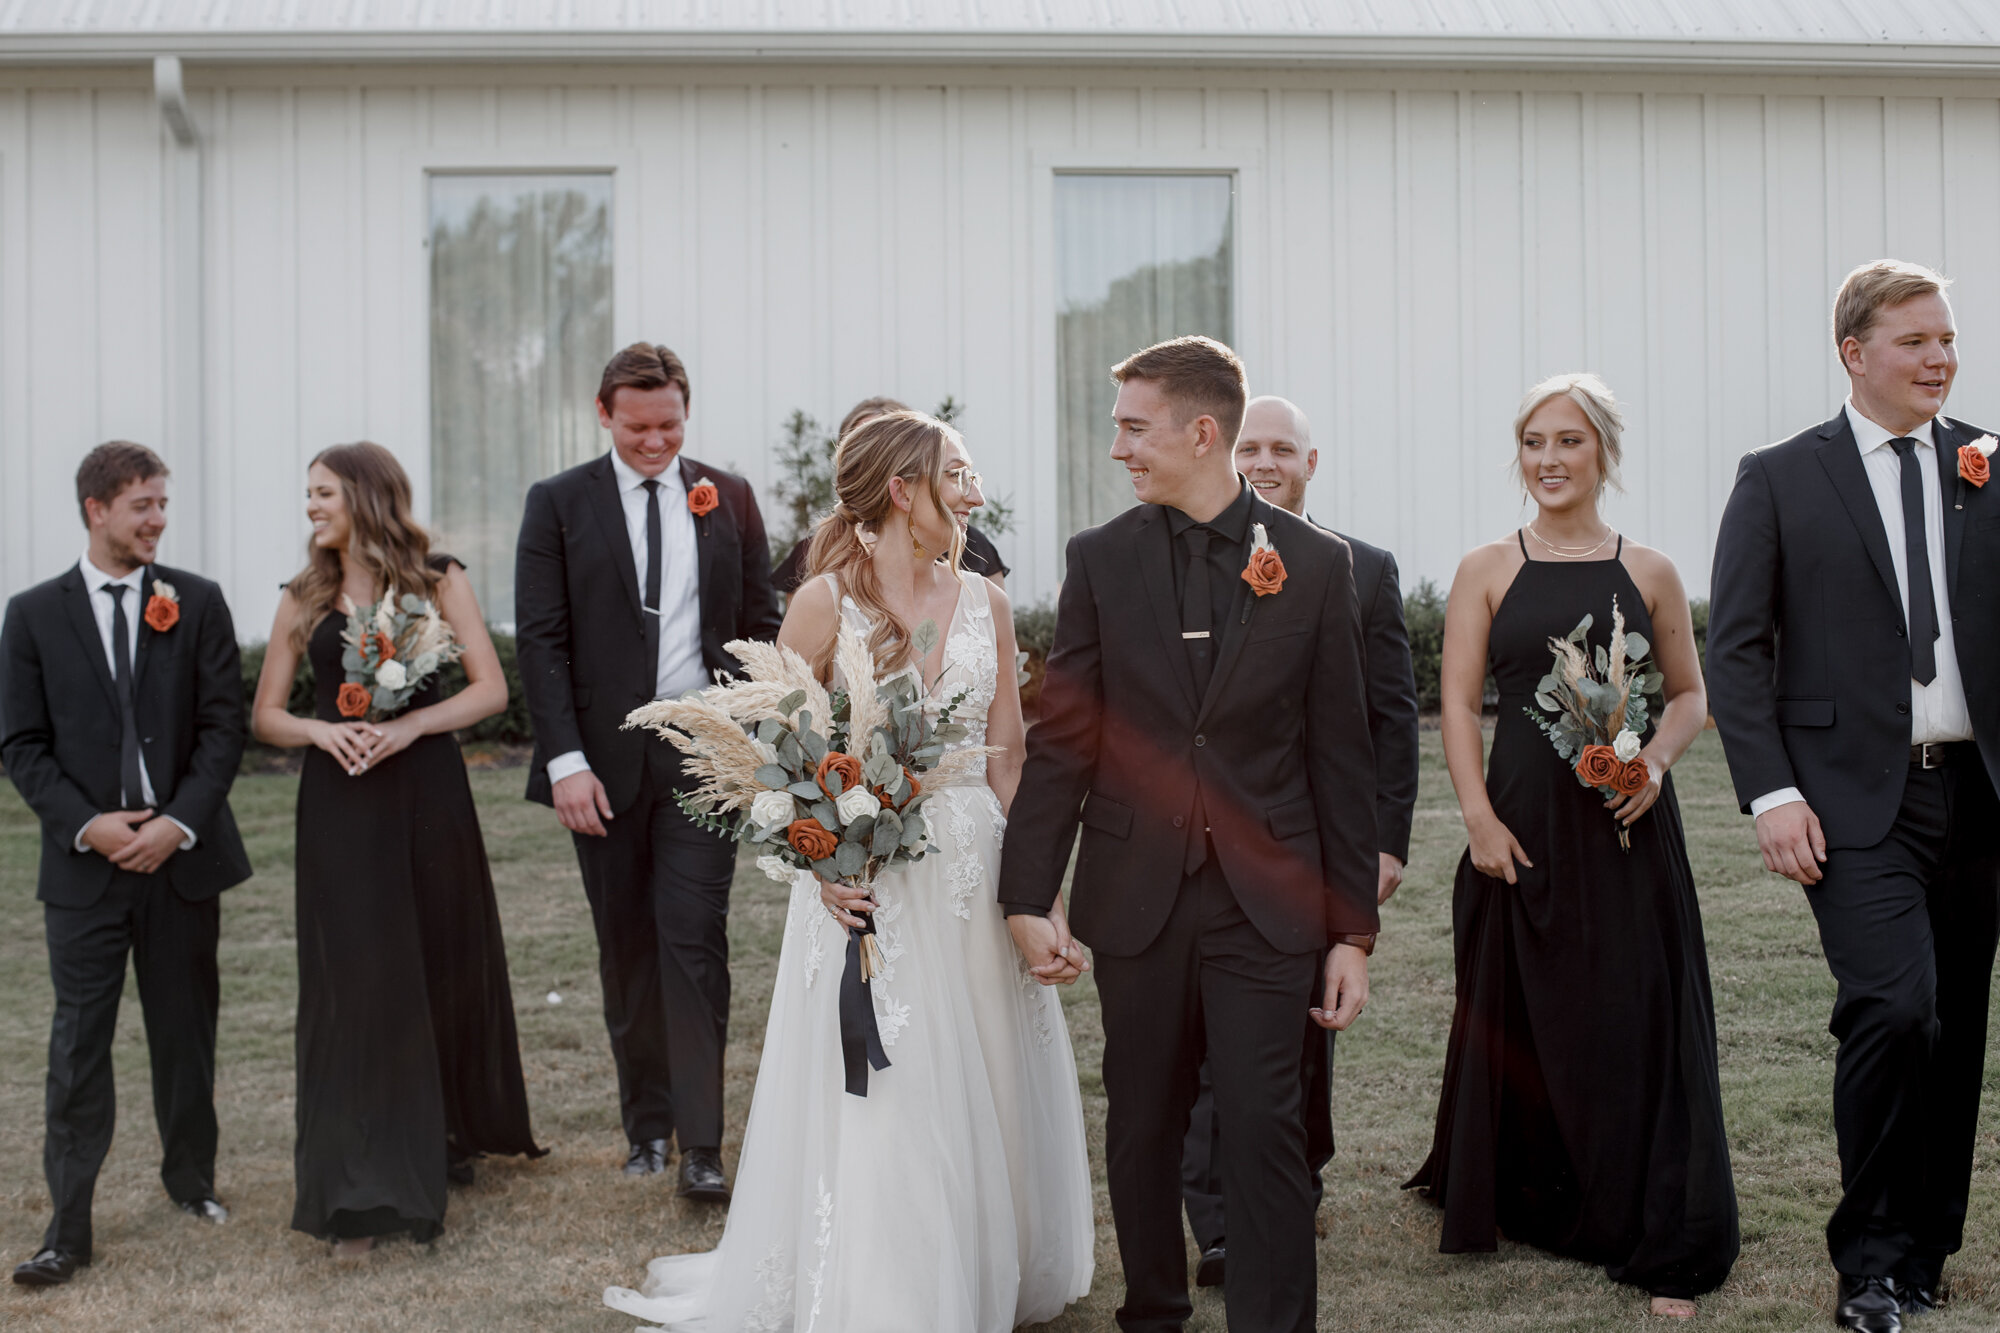 Bride and groom walk together with bridal party. Burnt Orange and Black Fall Wedding at The Farmhouse